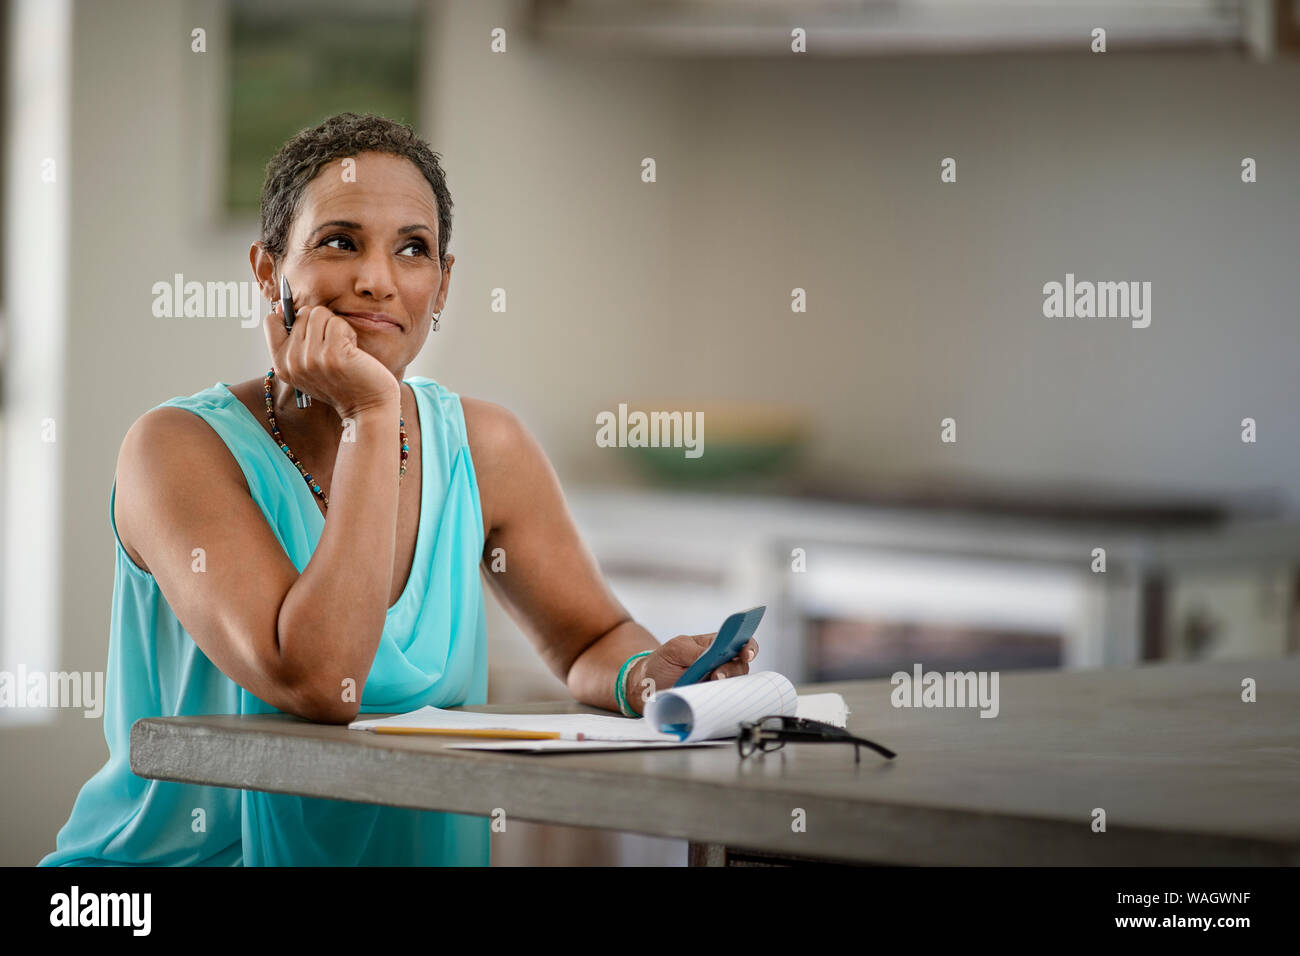 Woman reading at kitchen counter Stock Photo